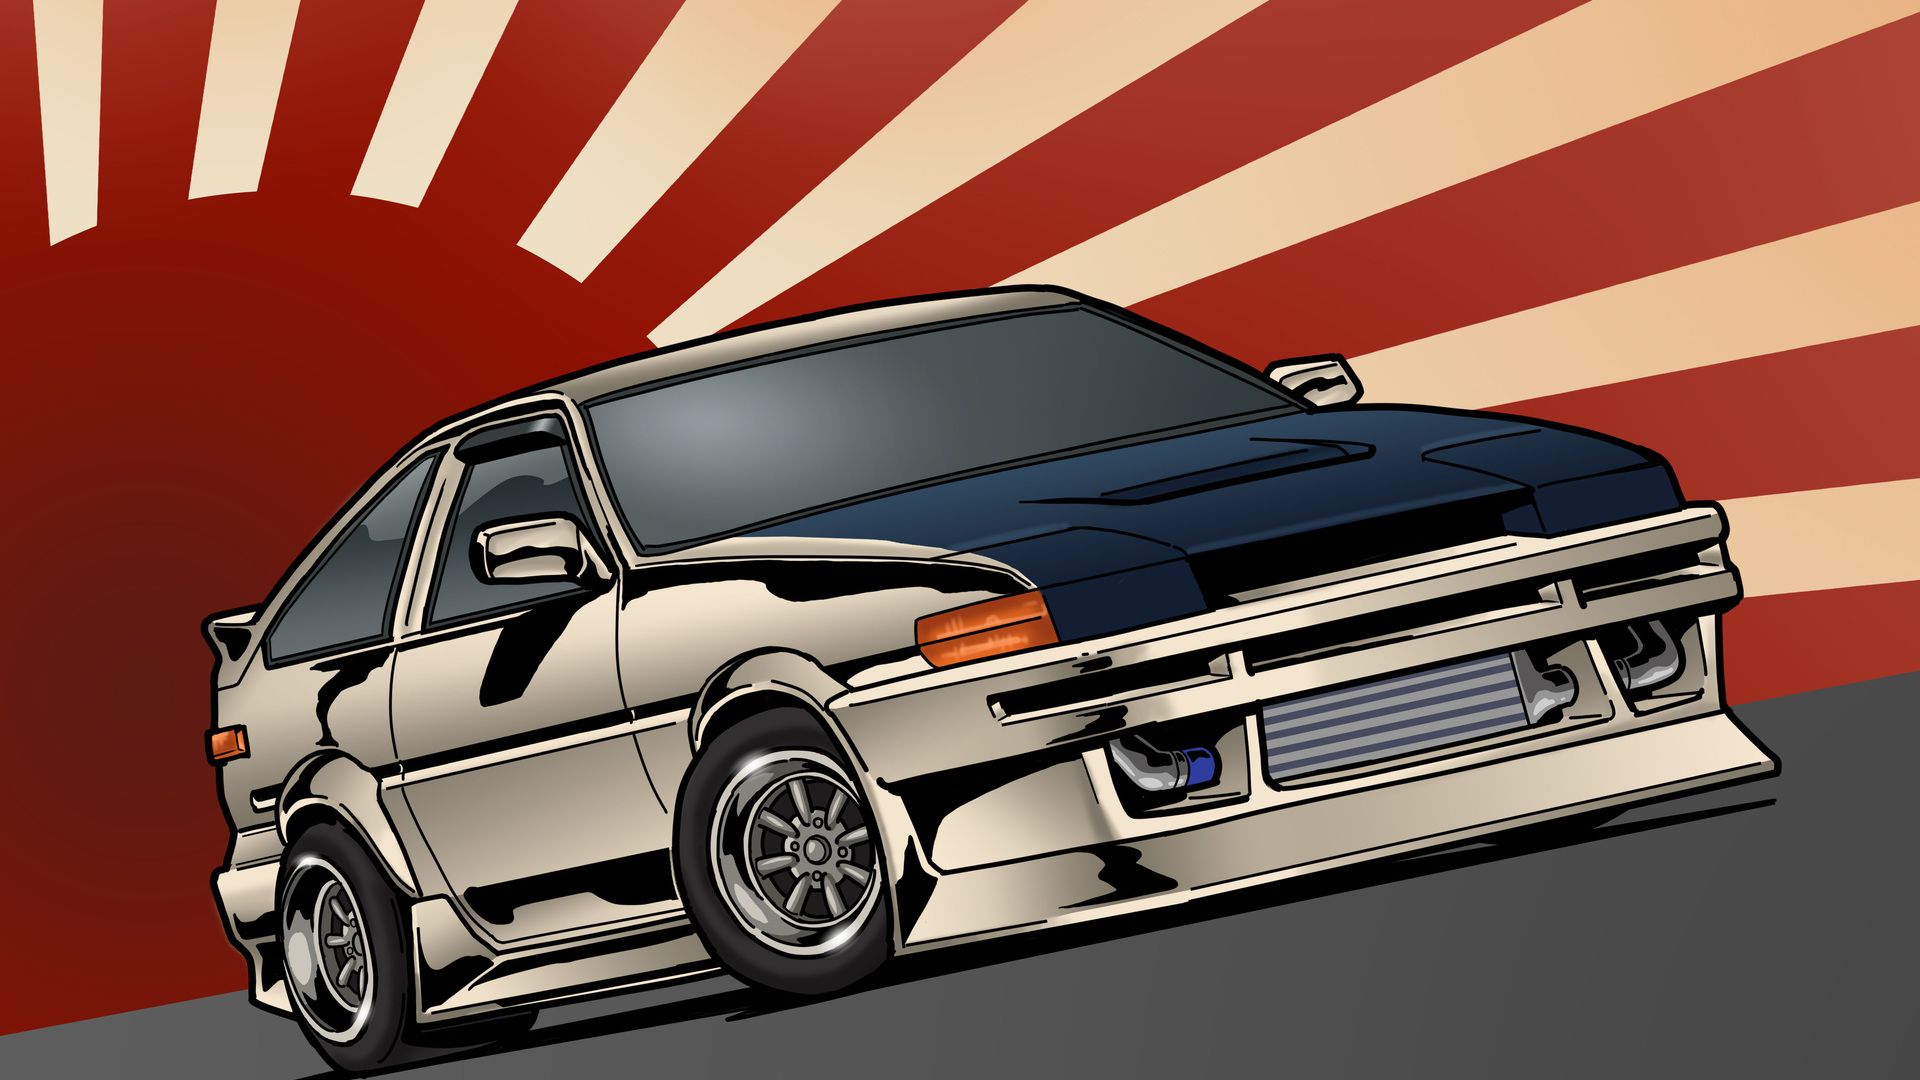 Jdm X Anime Wallpapers - Wallpaper Cave